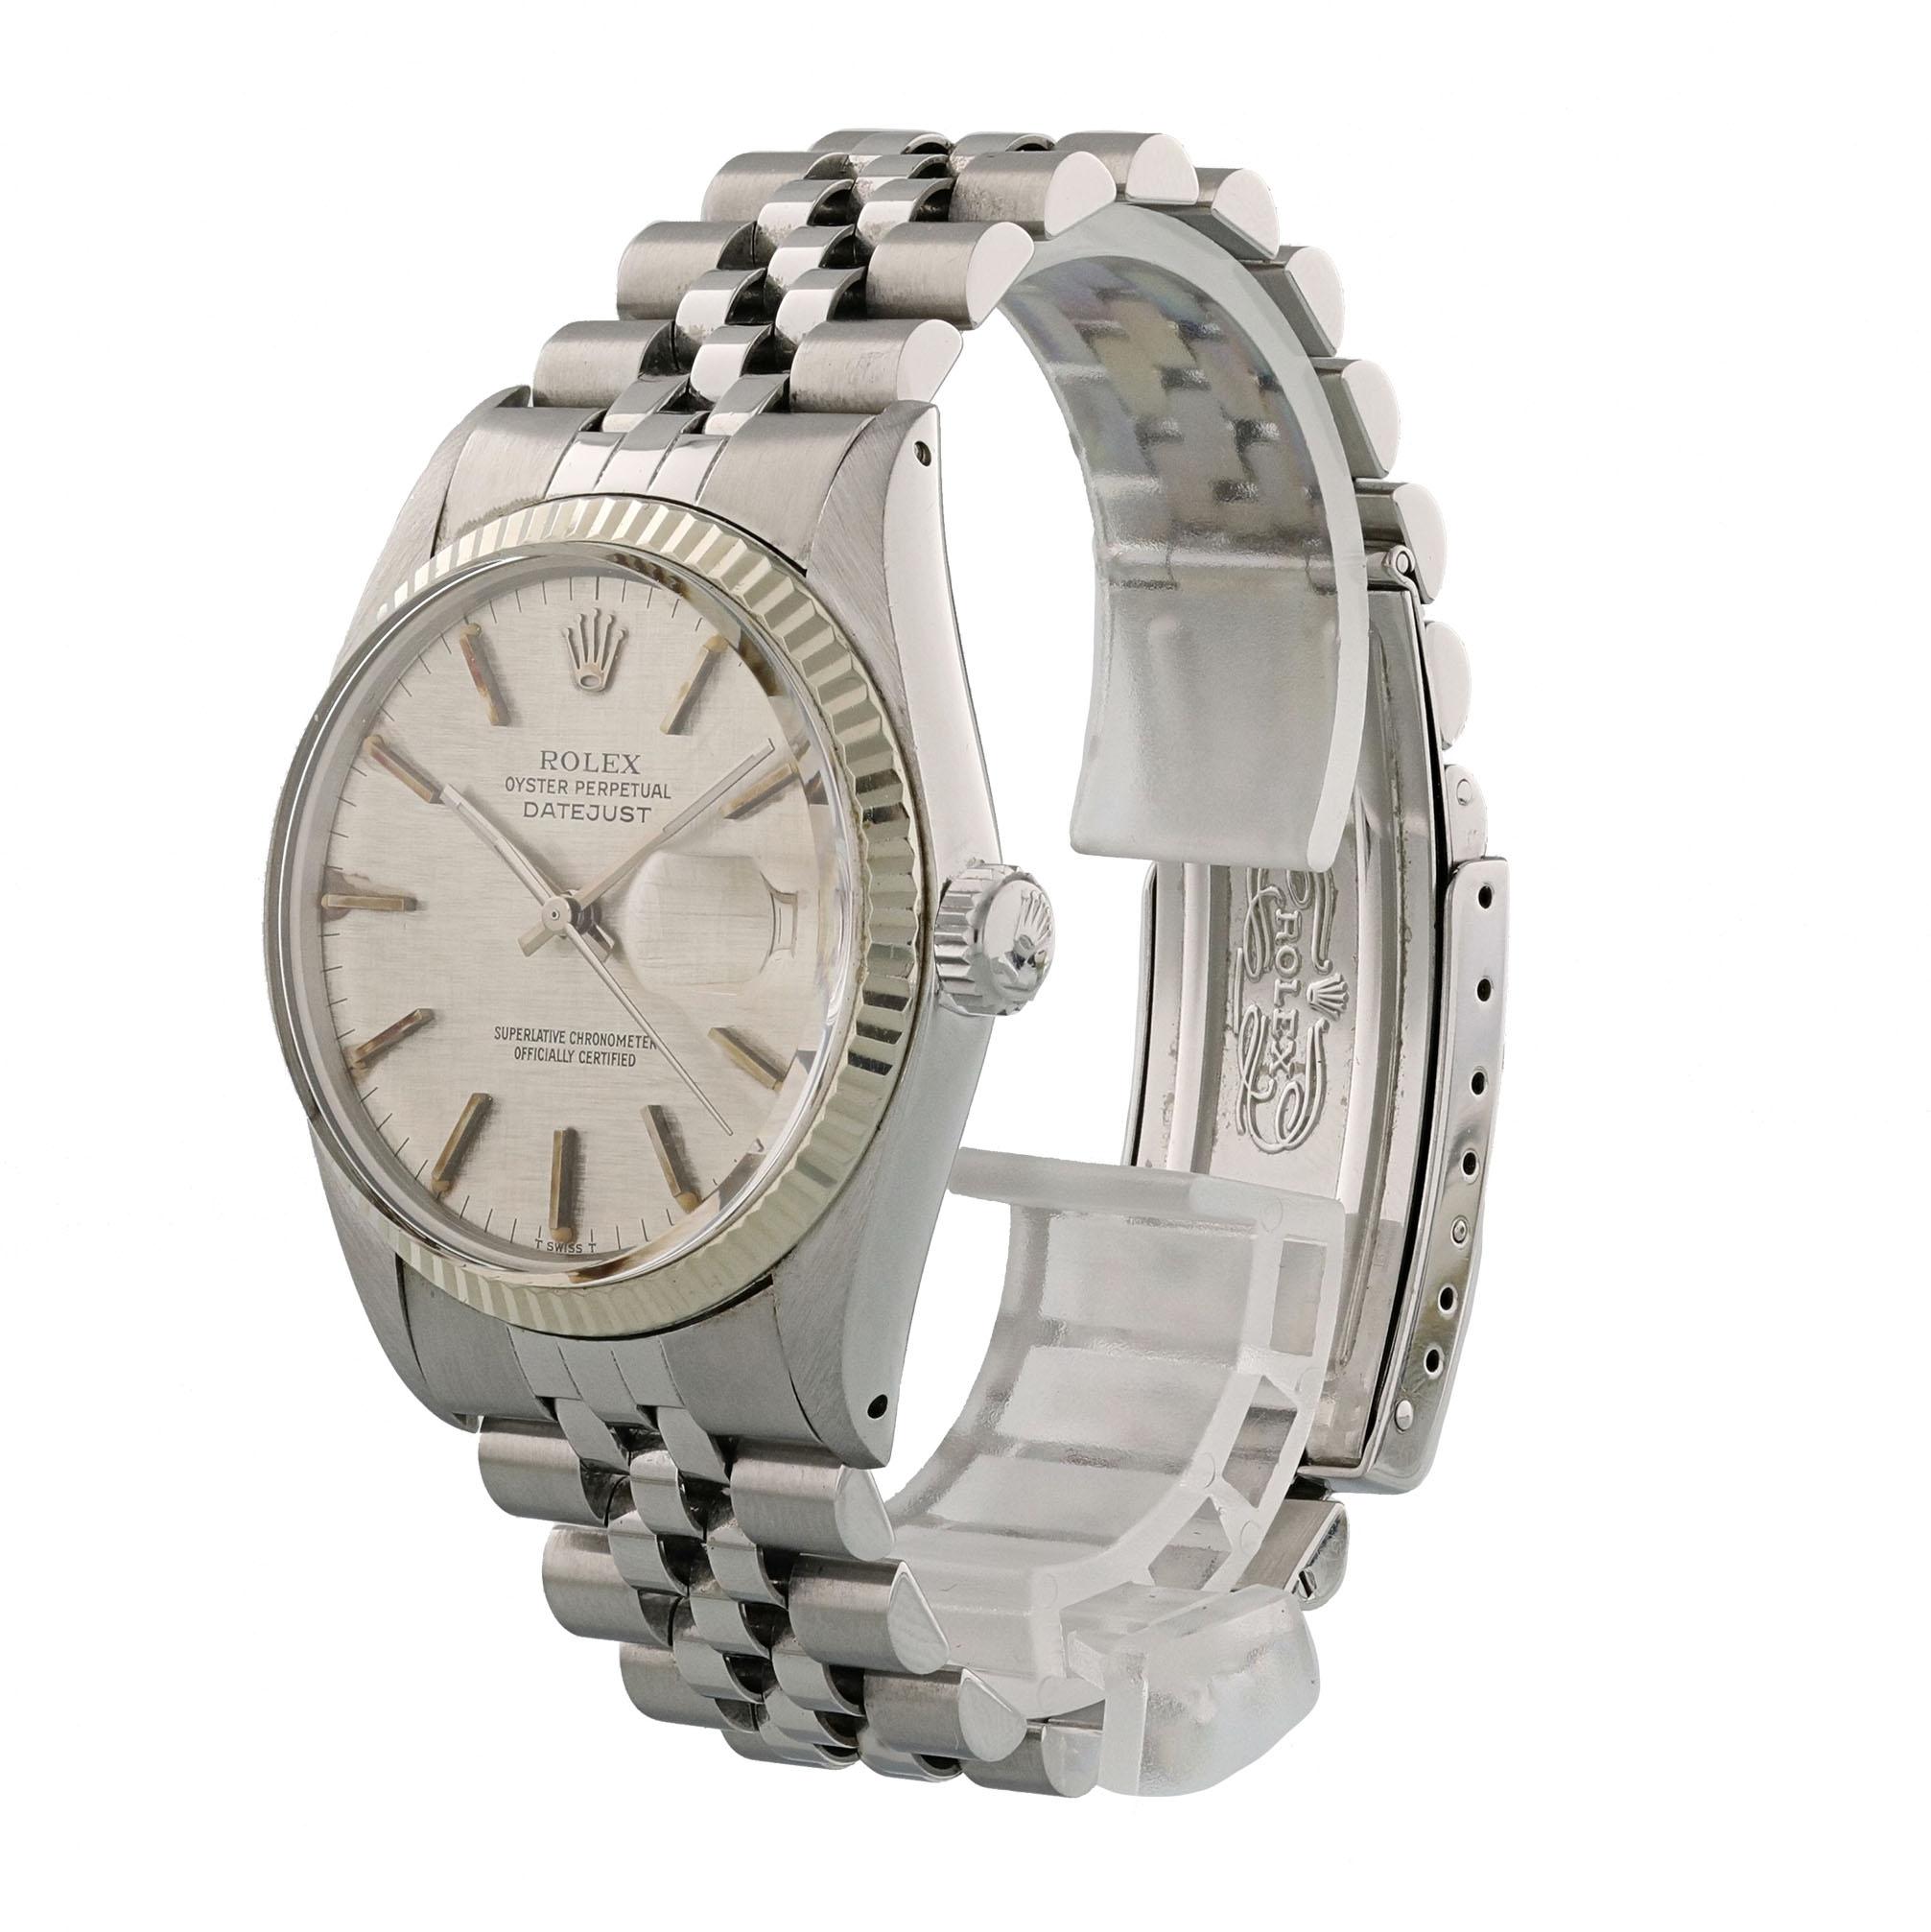 Rolex Datejust 16014 Men's Watch.
36mm Stainless Steel case. 
White Gold fluted bezel. 
Grey Linen dial with steel hands and index hour markers. Some aging around the indexes.
Minute markers on the outer dial. 
Date display at the 3 o'clock